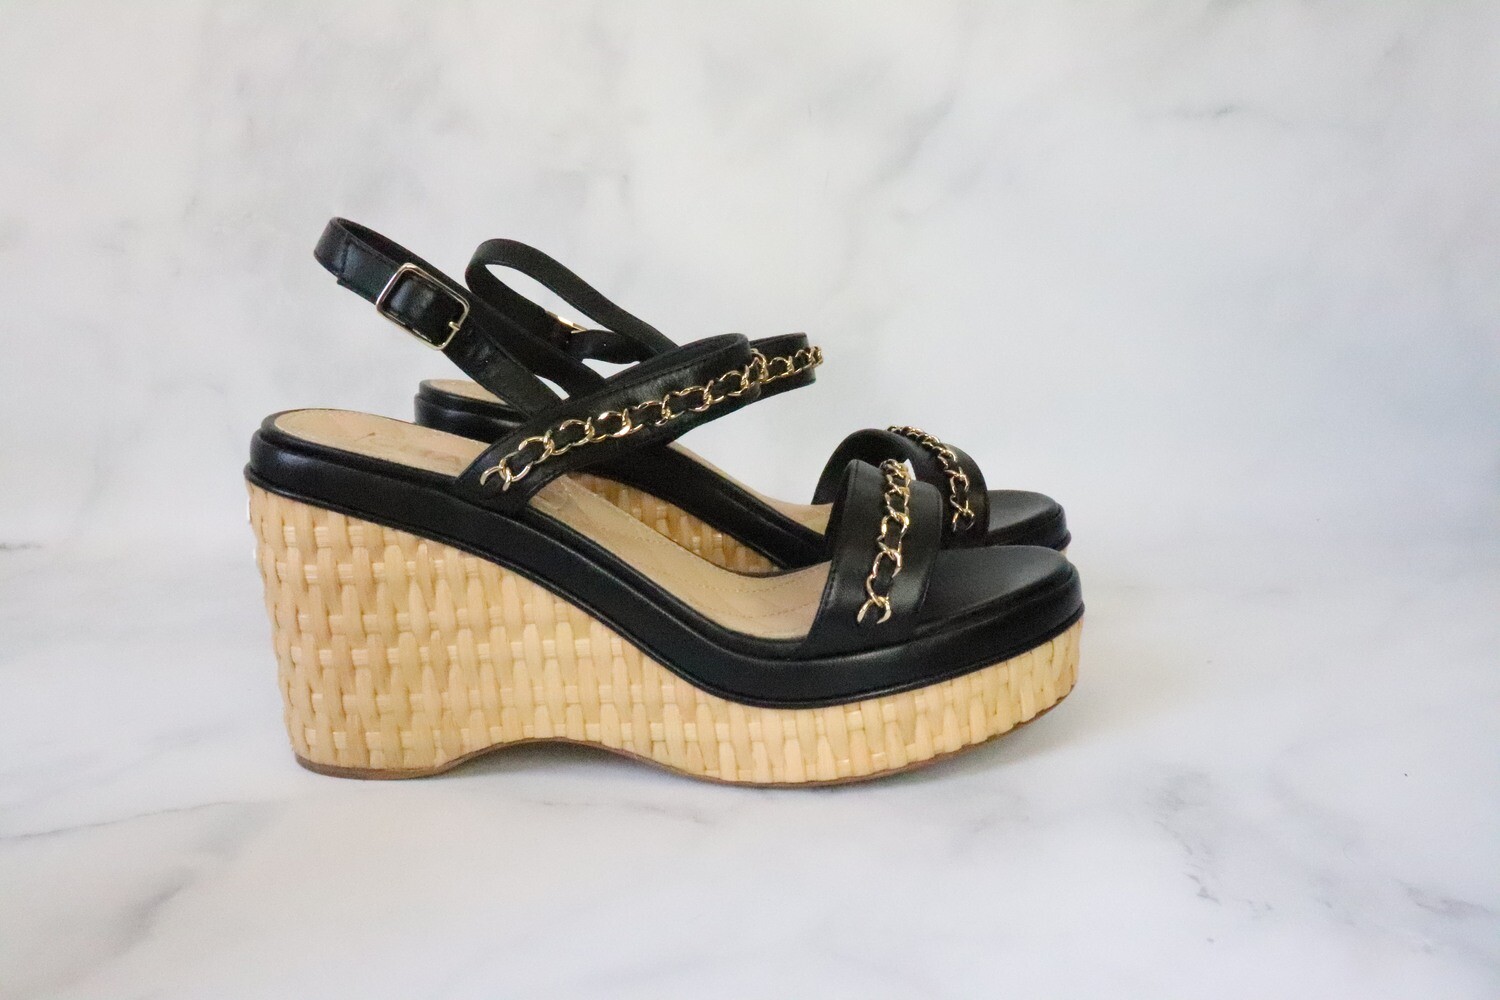 Chanel Shoes 20C Wedges Black with Raffia, New in Box